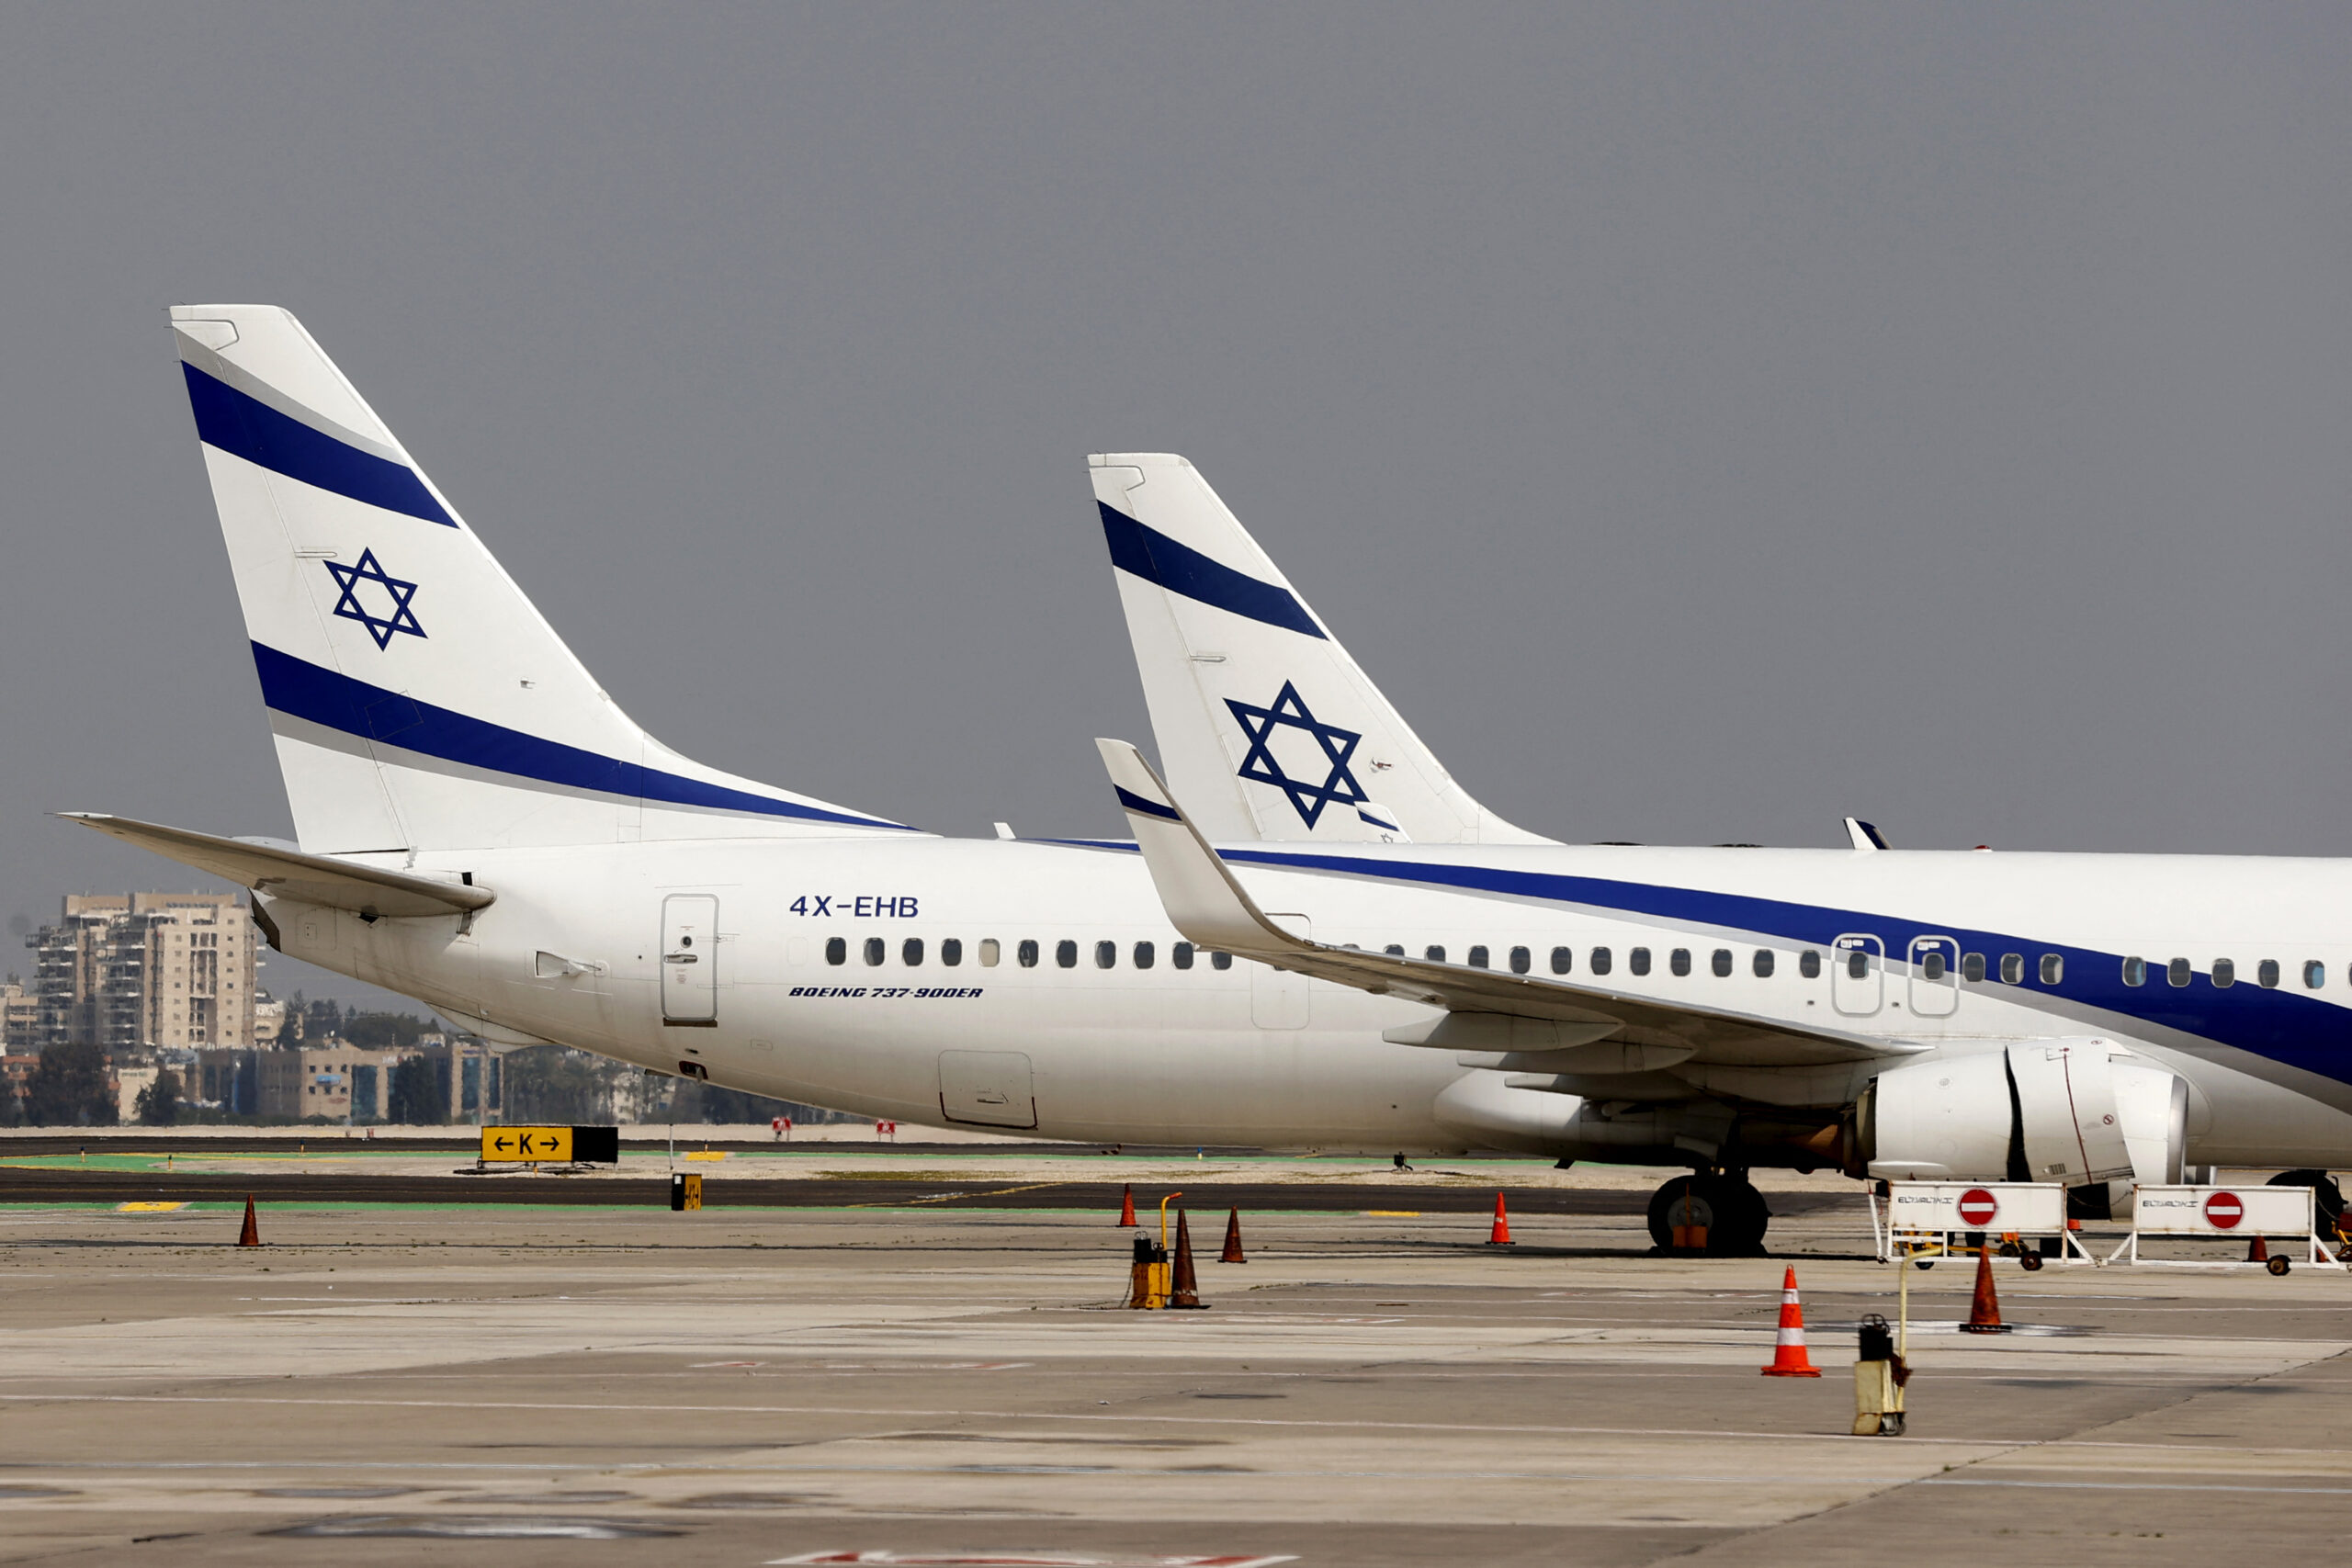 Israel carrier says Turkish workers refused to refuel plane